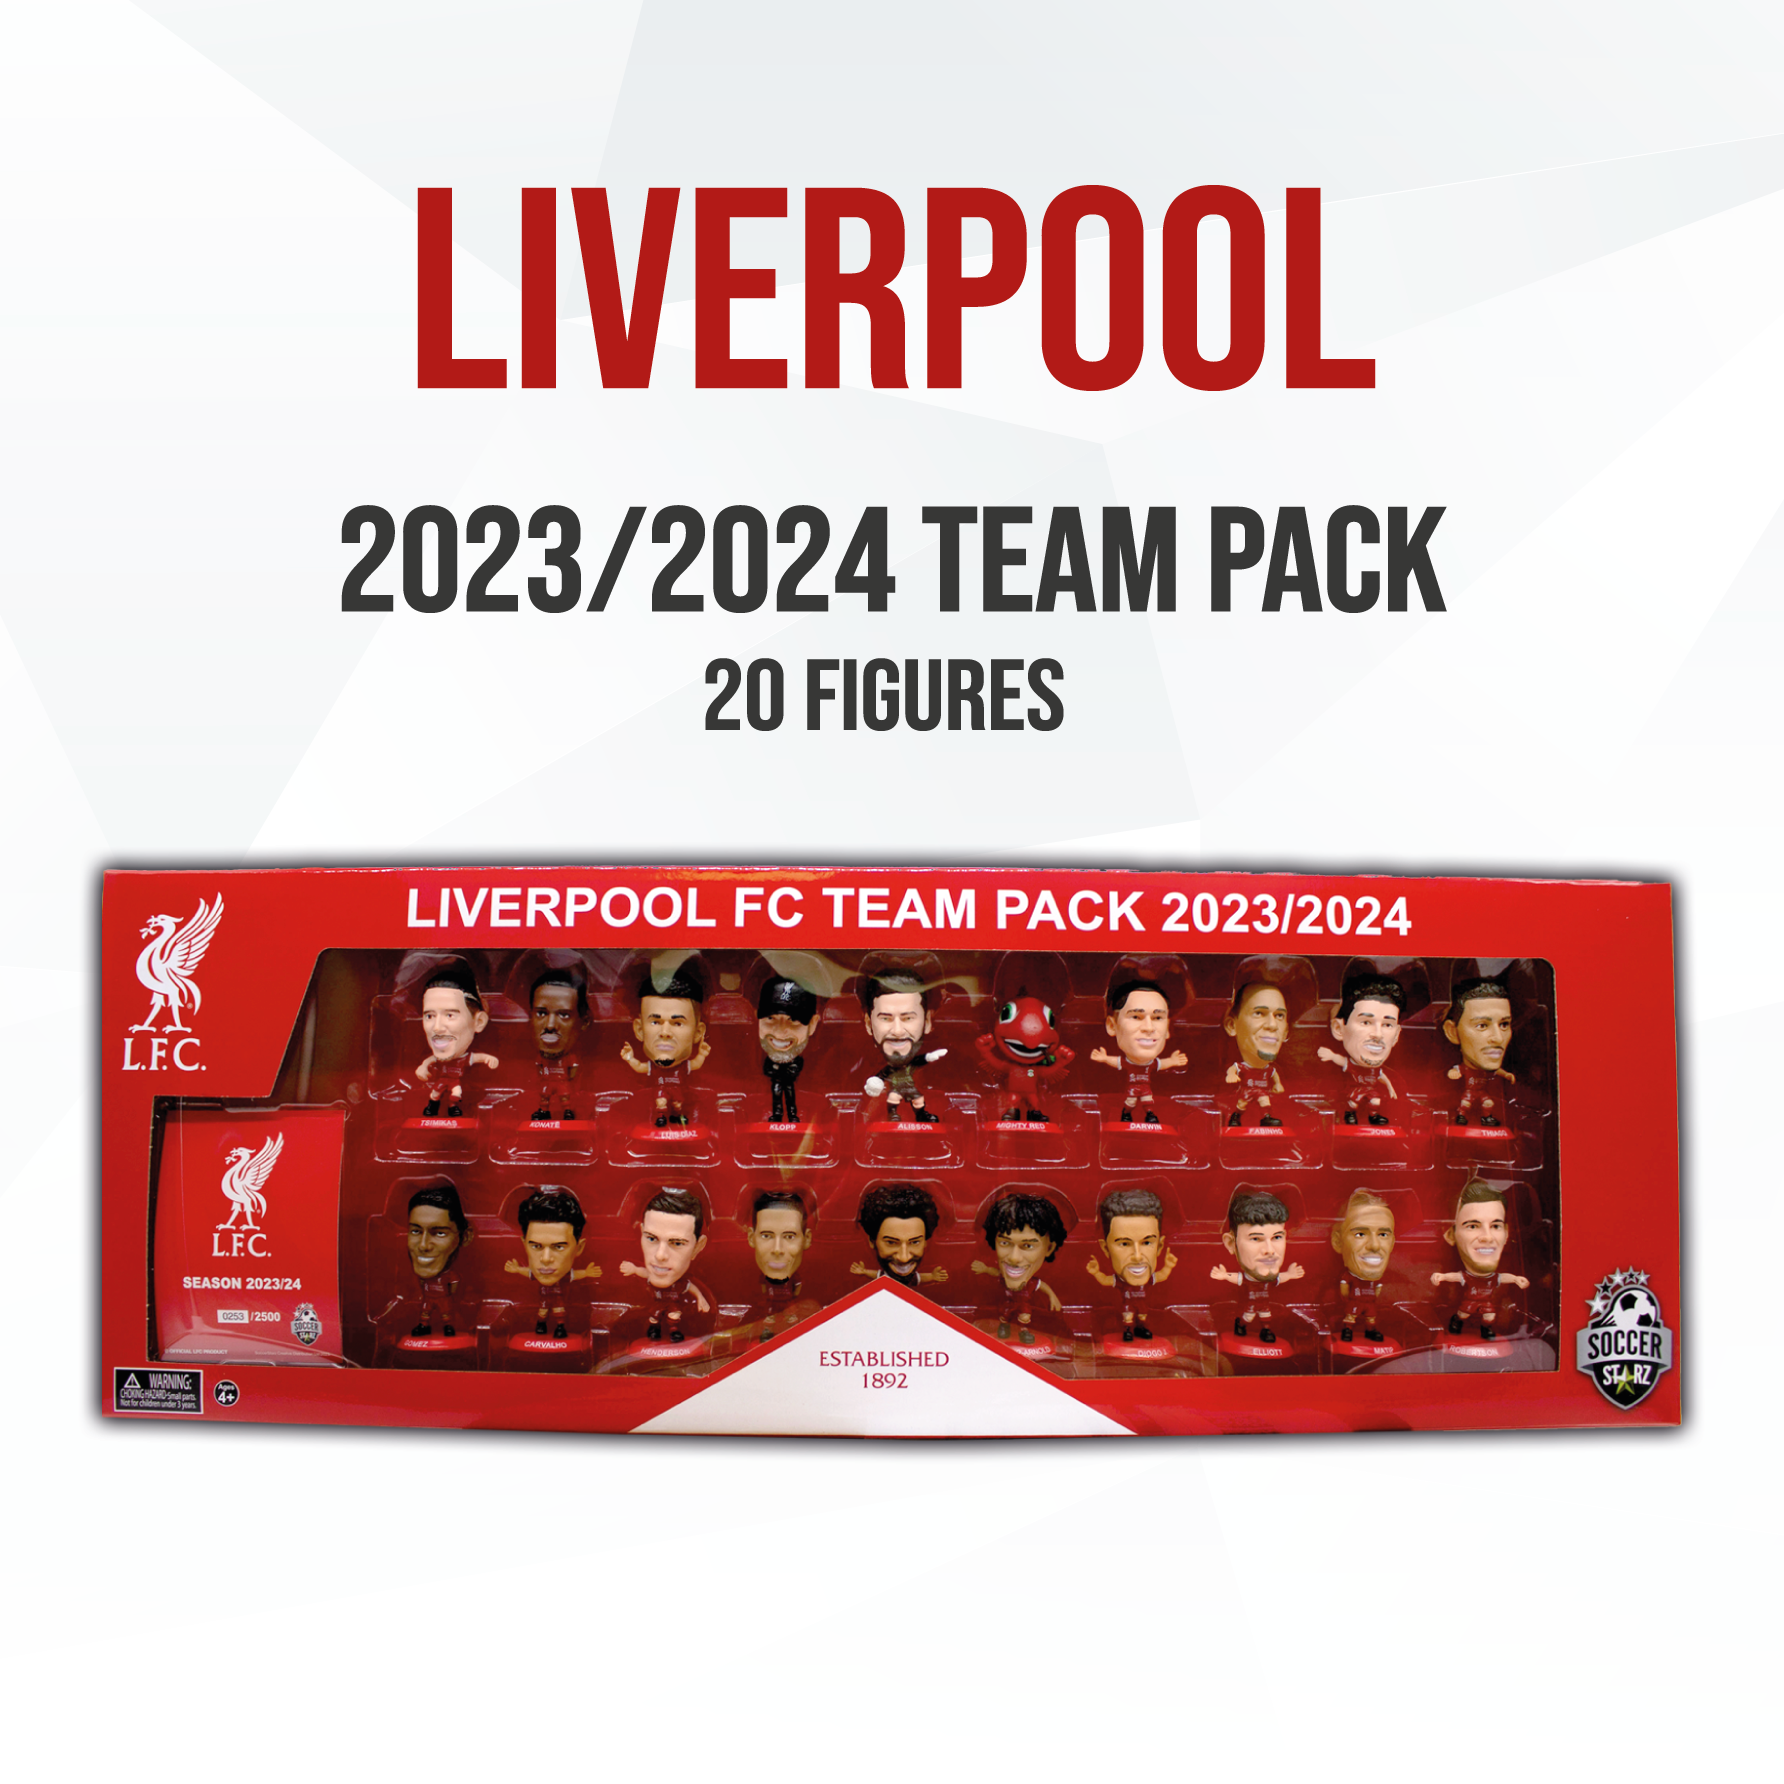 liverpool-REAL-PACK_bcd0d4c3-721c-4724-9c53-bcdfc507e8db